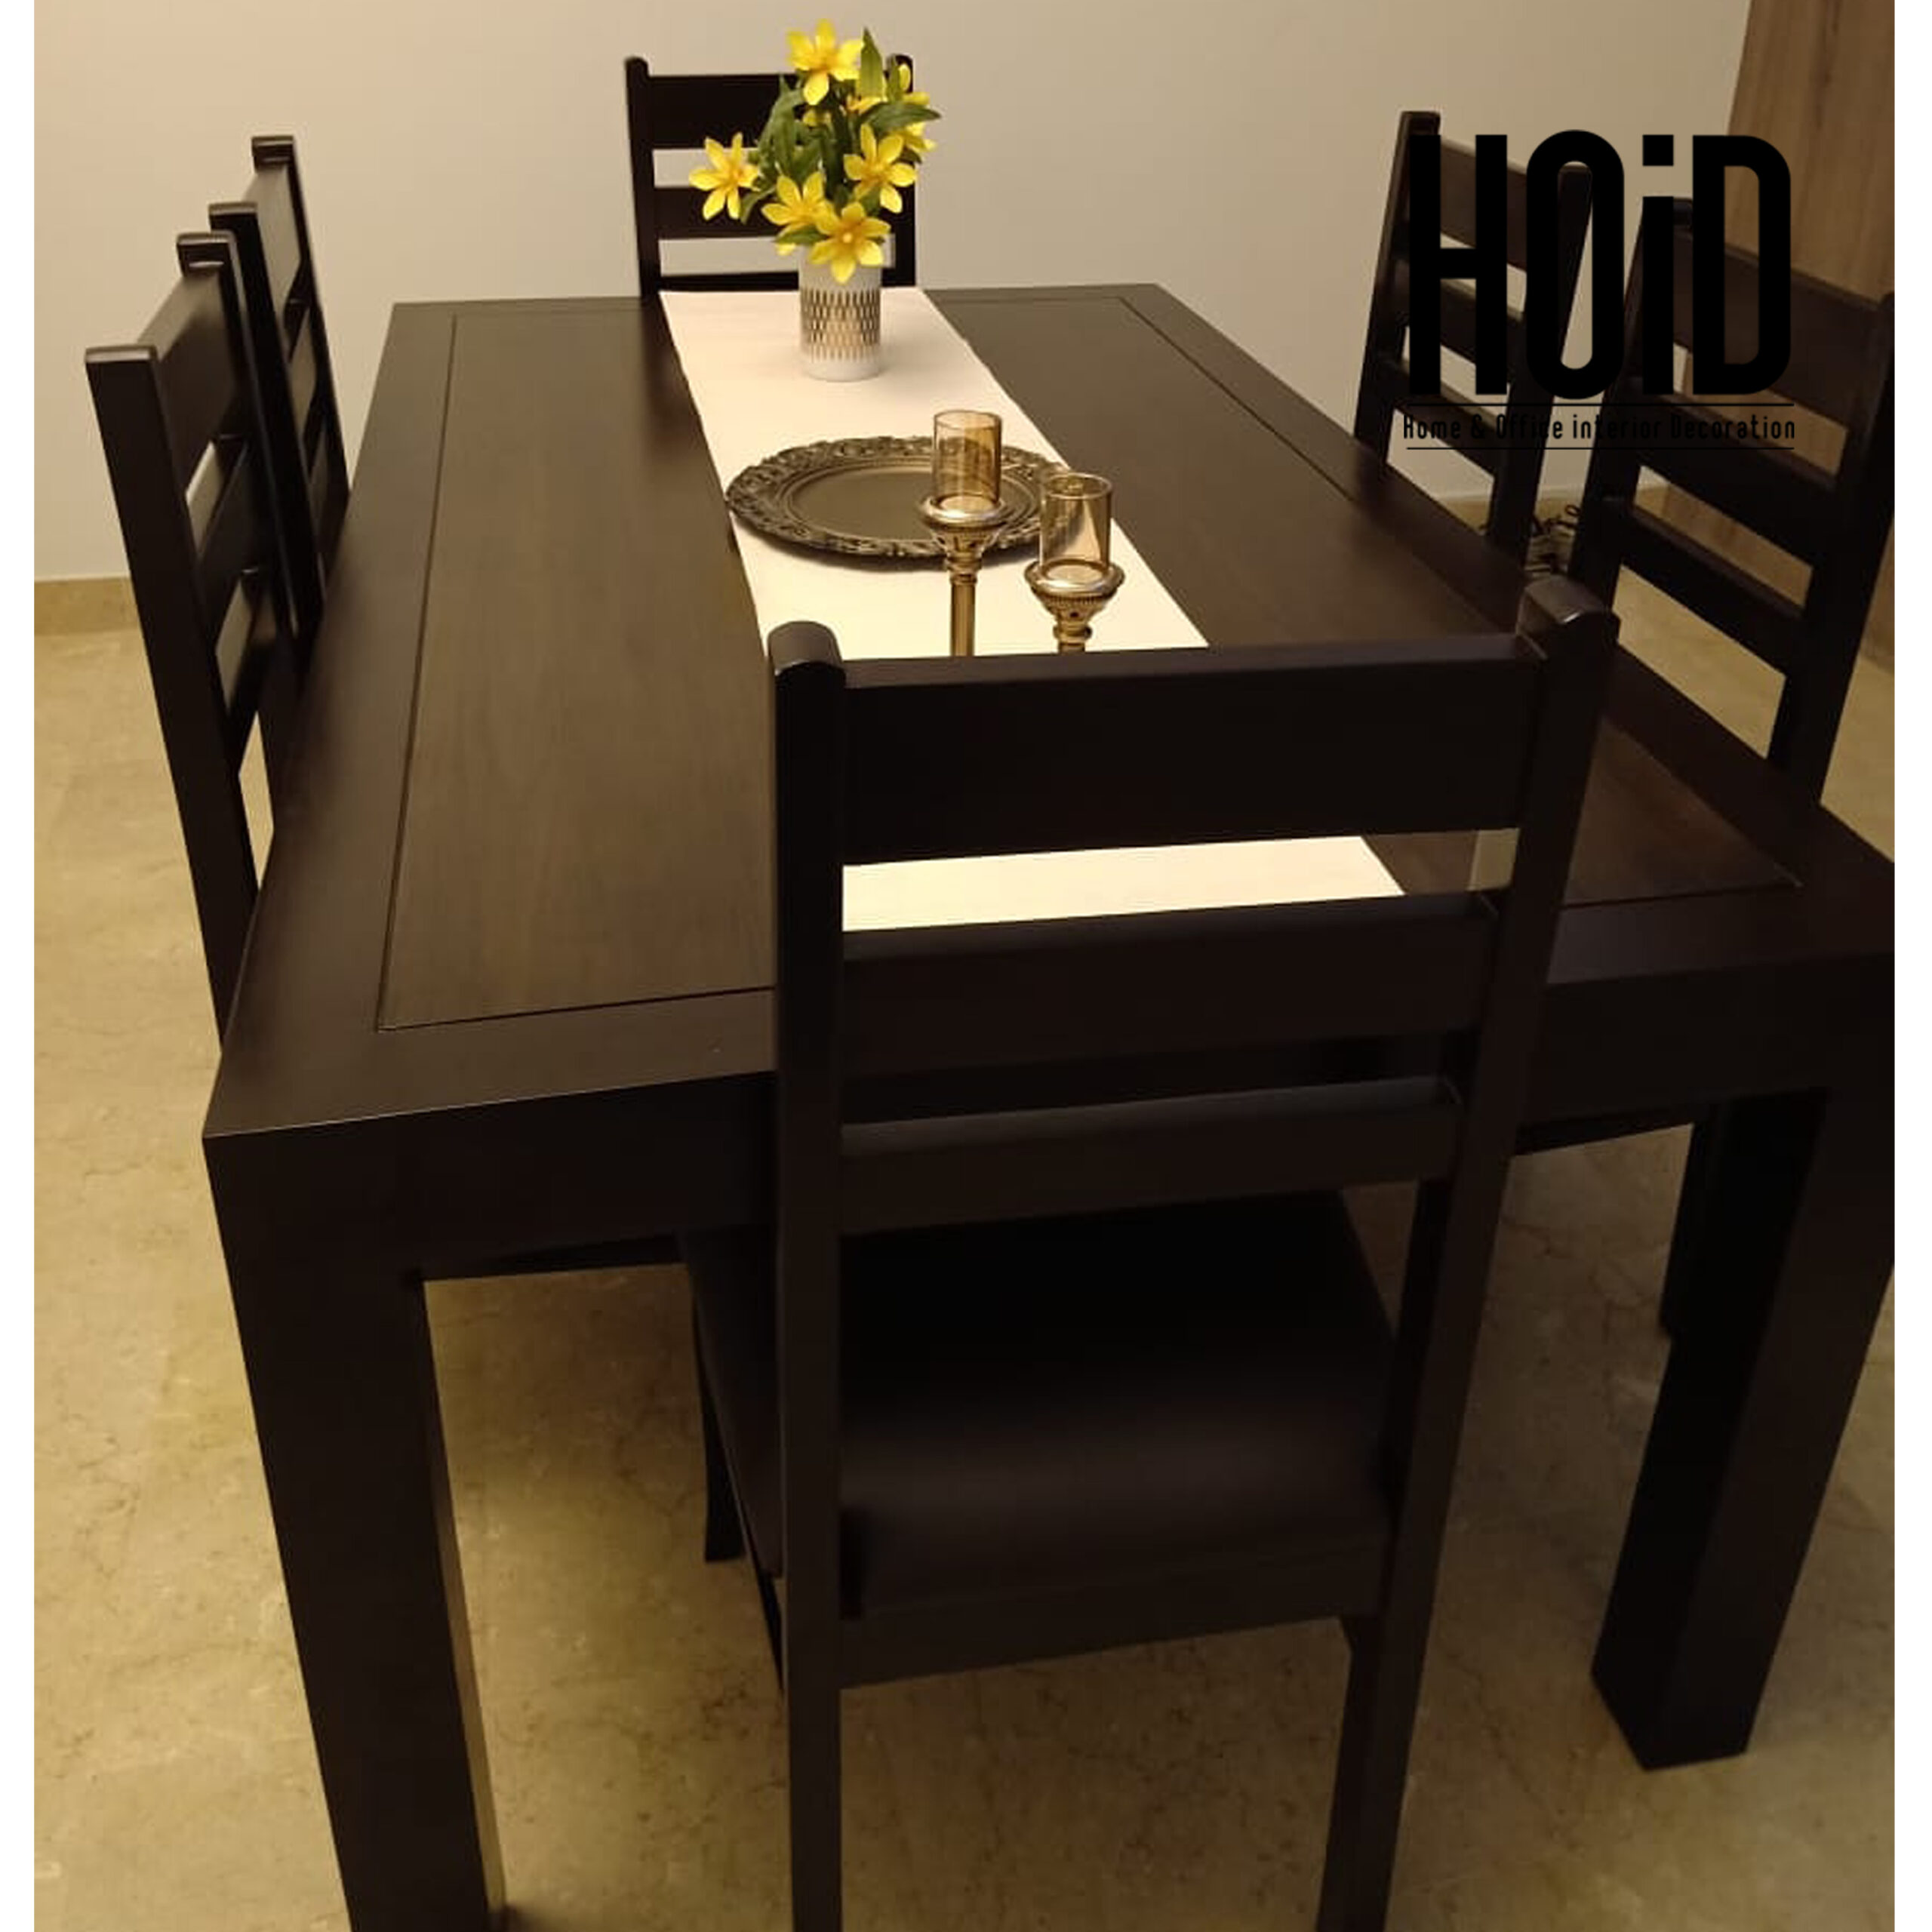 6 Seater Dining Table With Chairs, How Long Is A Table With 6 Chairs